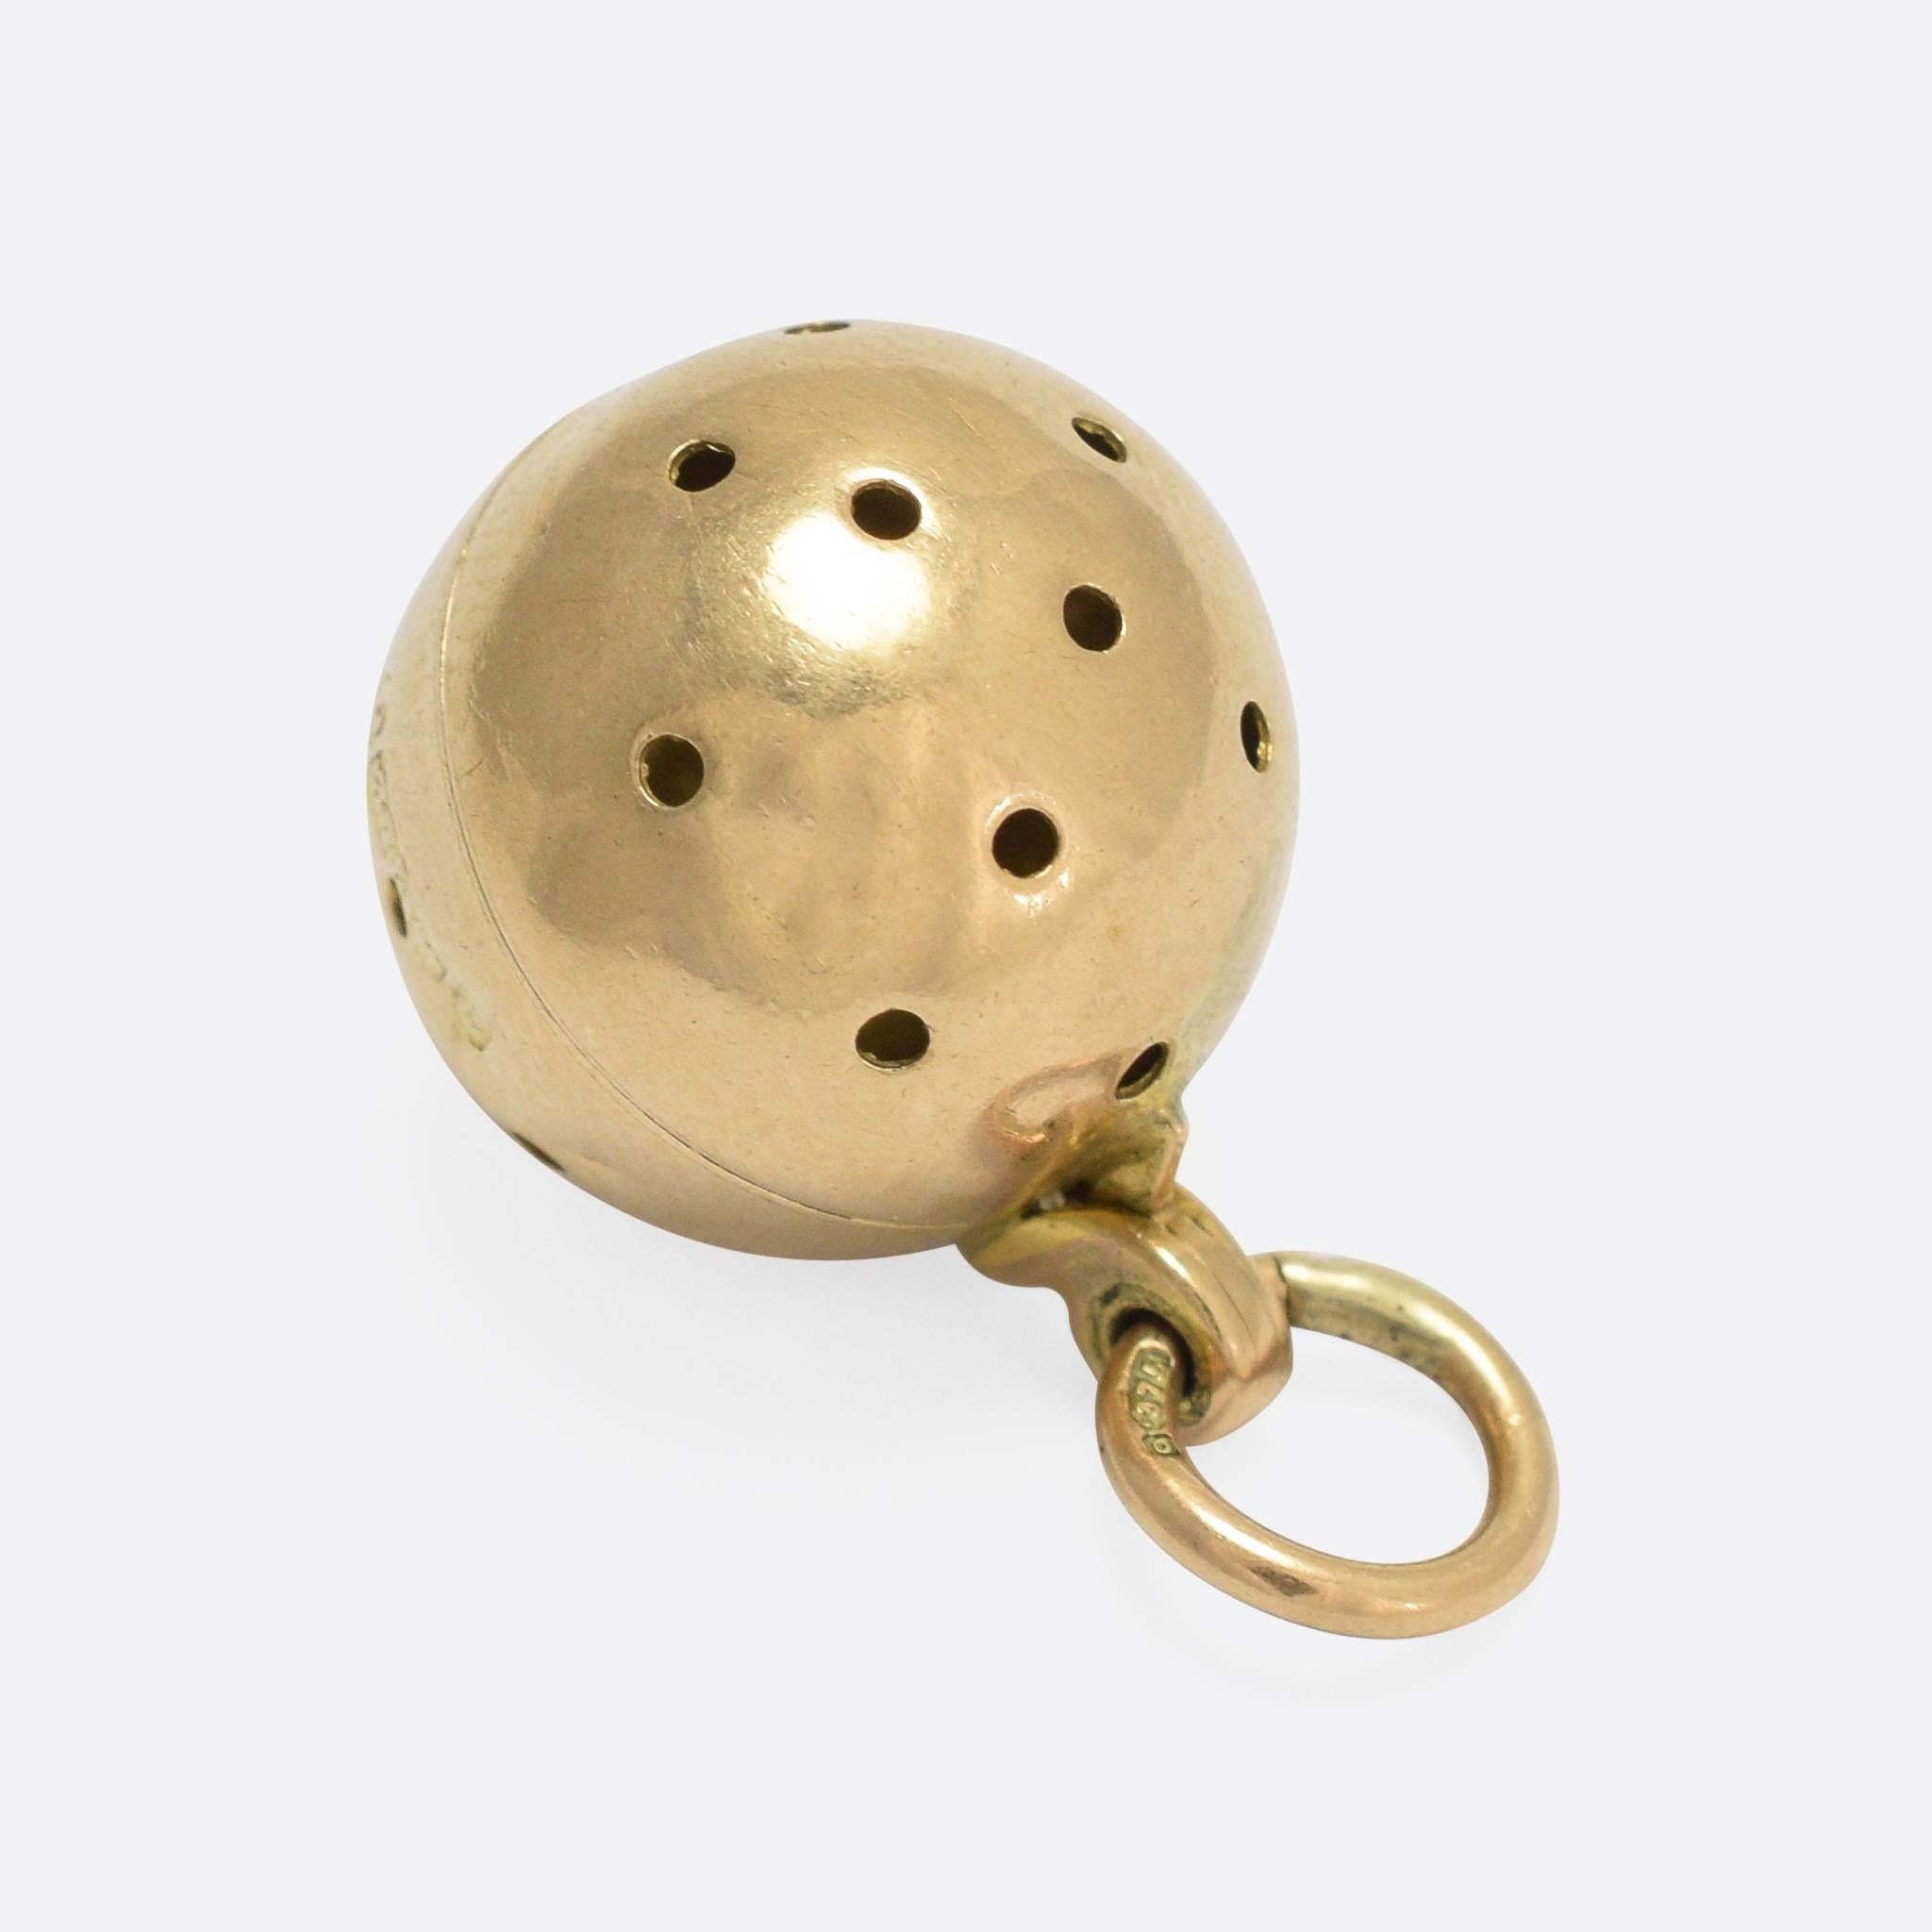 An unusual - and very sweet - vinaigrette pendant, modelled as an orb with little holes all around. It's crafted from 9k yellow gold, with clear English hallmarks dating to the year 1902 - the very beginning of the Edwardian era. 
This style of